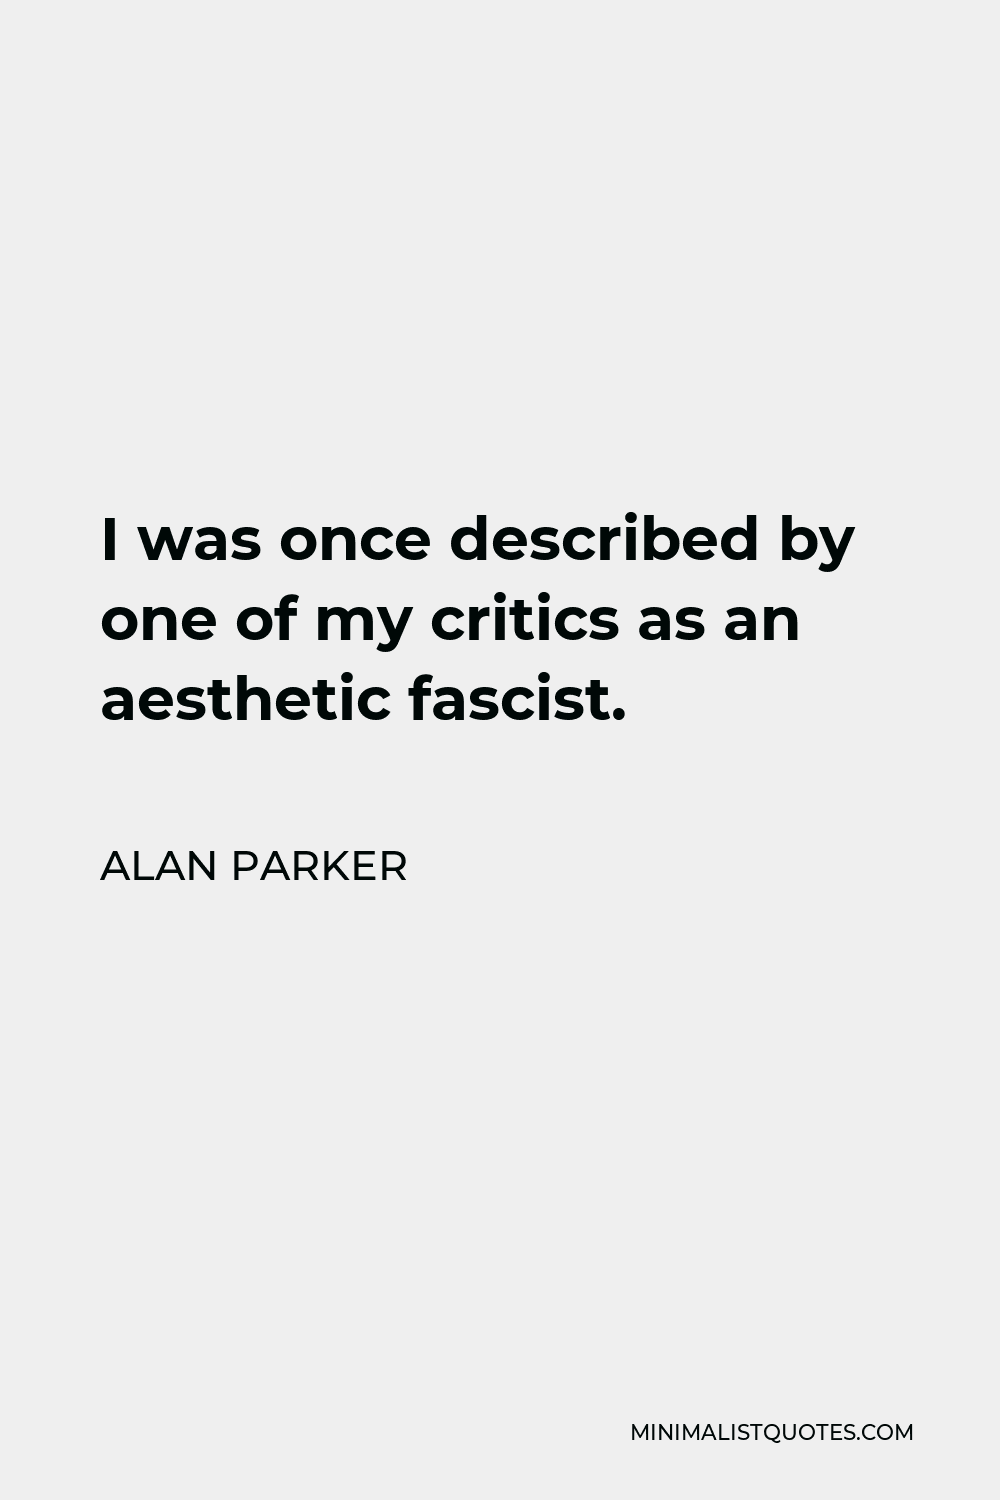 Alan Parker Quote - I was once described by one of my critics as an aesthetic fascist.